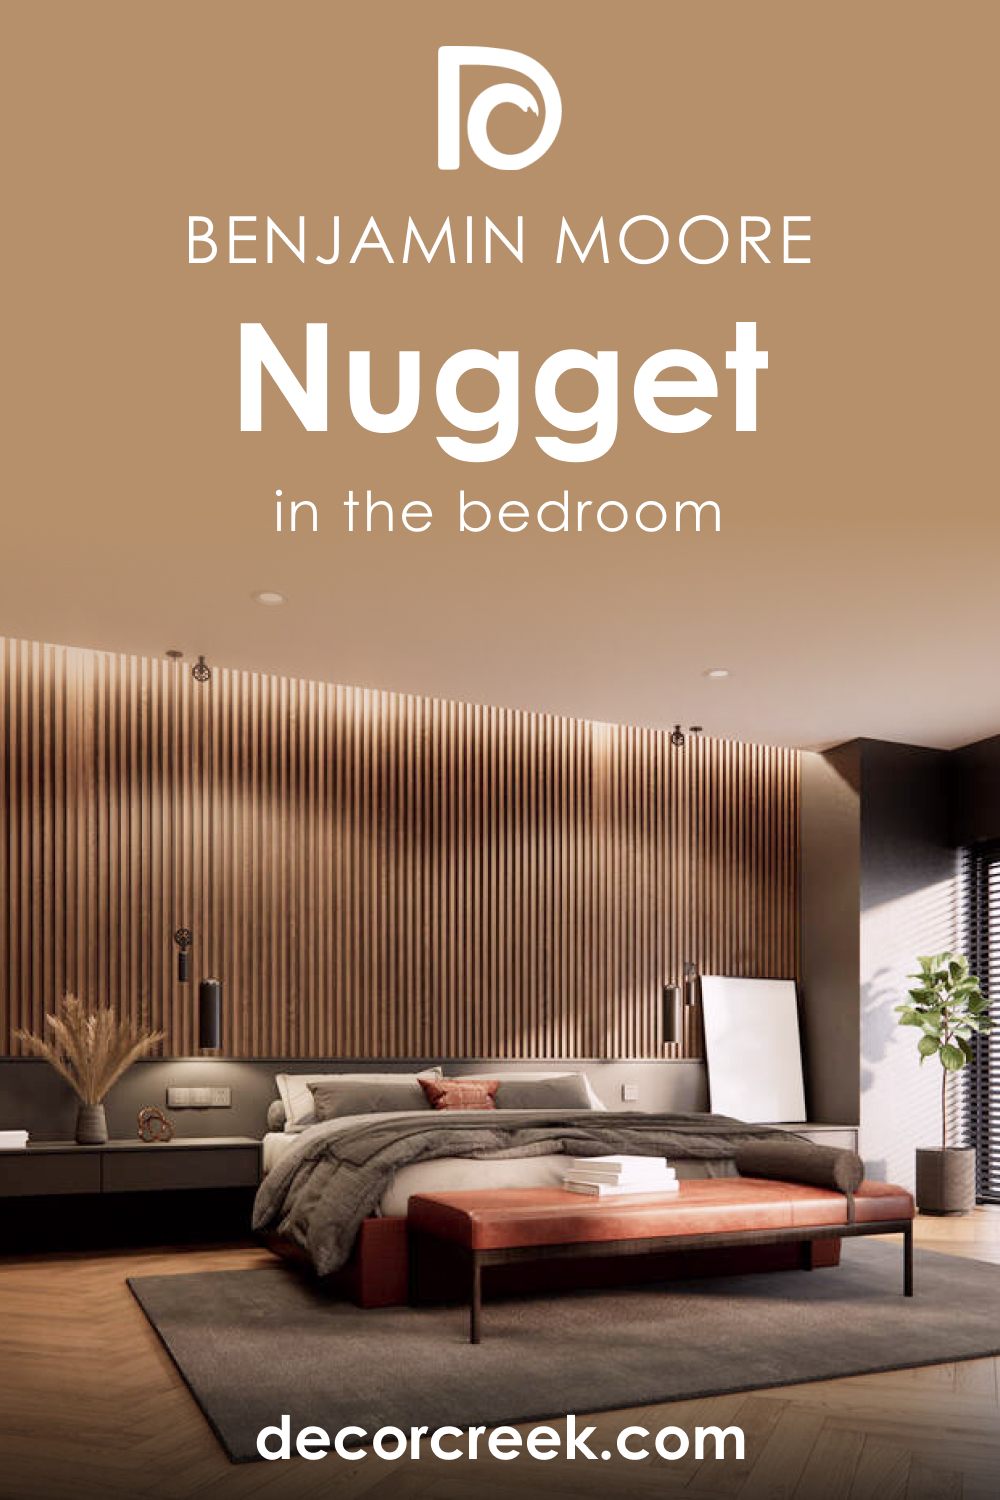 How to Use Nugget AC-9 in the Bedroom?